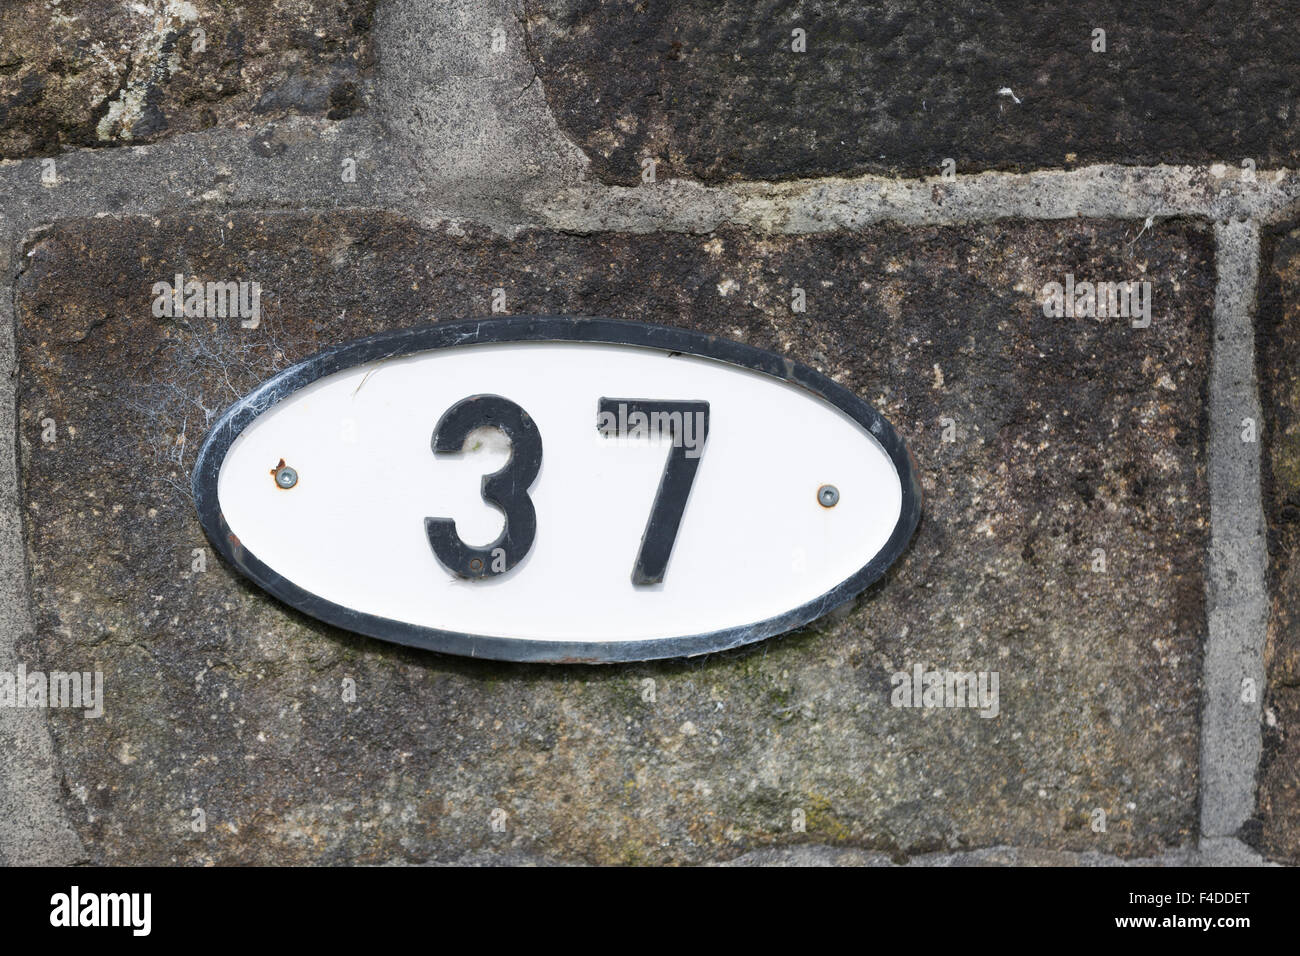 UK, Toddmerdon, bridge number 37 on the Rochdale canal'. Stock Photo